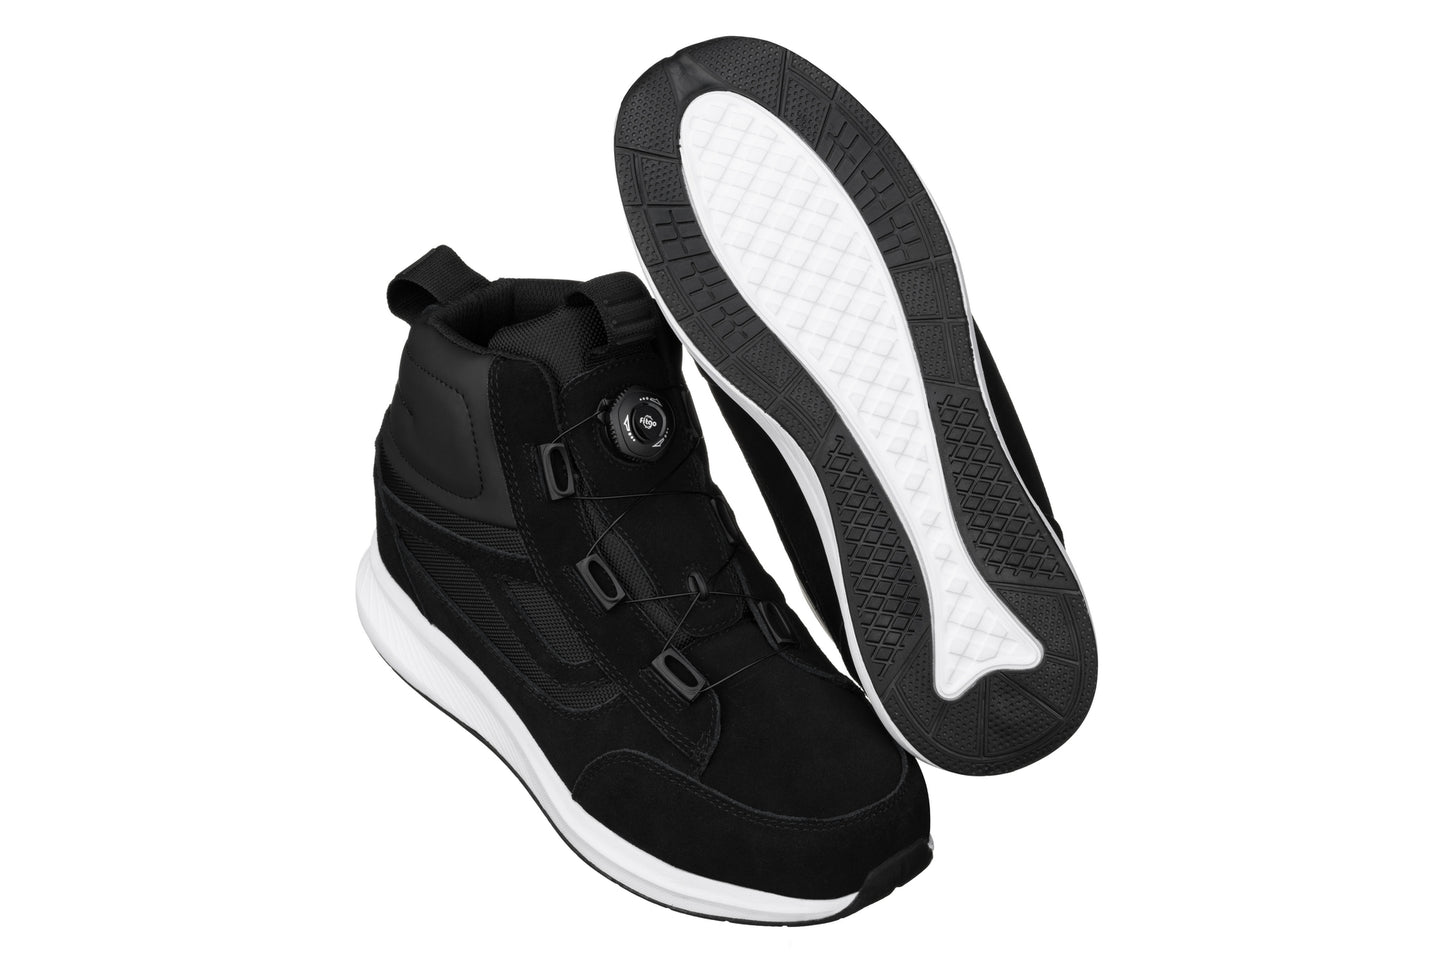 Elevator shoes height increase CALTO - S3220 - 3.2 Inches Taller (Black) - Lightweight Sneakers